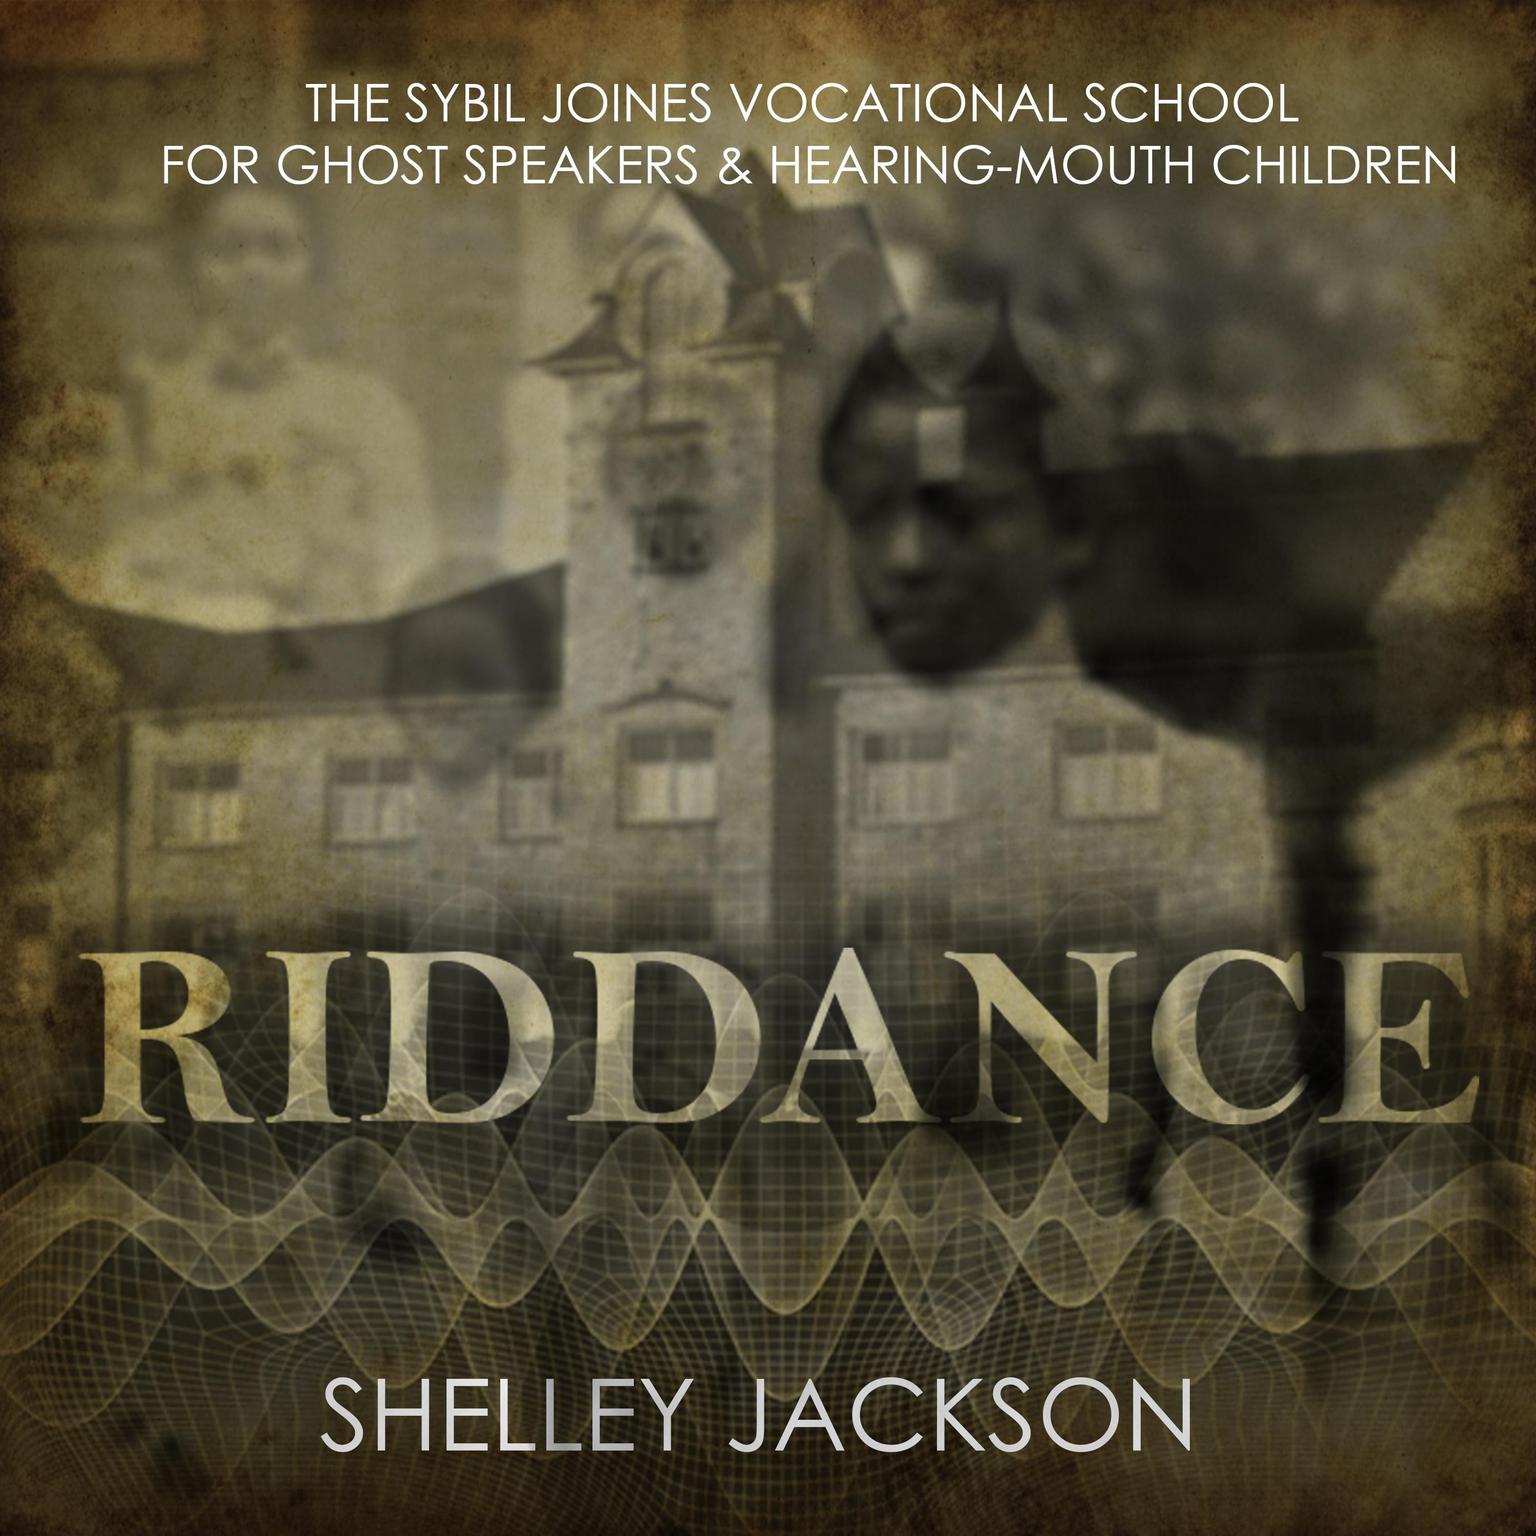 Riddance: Or: The Sybil Joines Vocational School for Ghost Speakers & Hearing-Mouth Children Audiobook, by Shelley Jackson